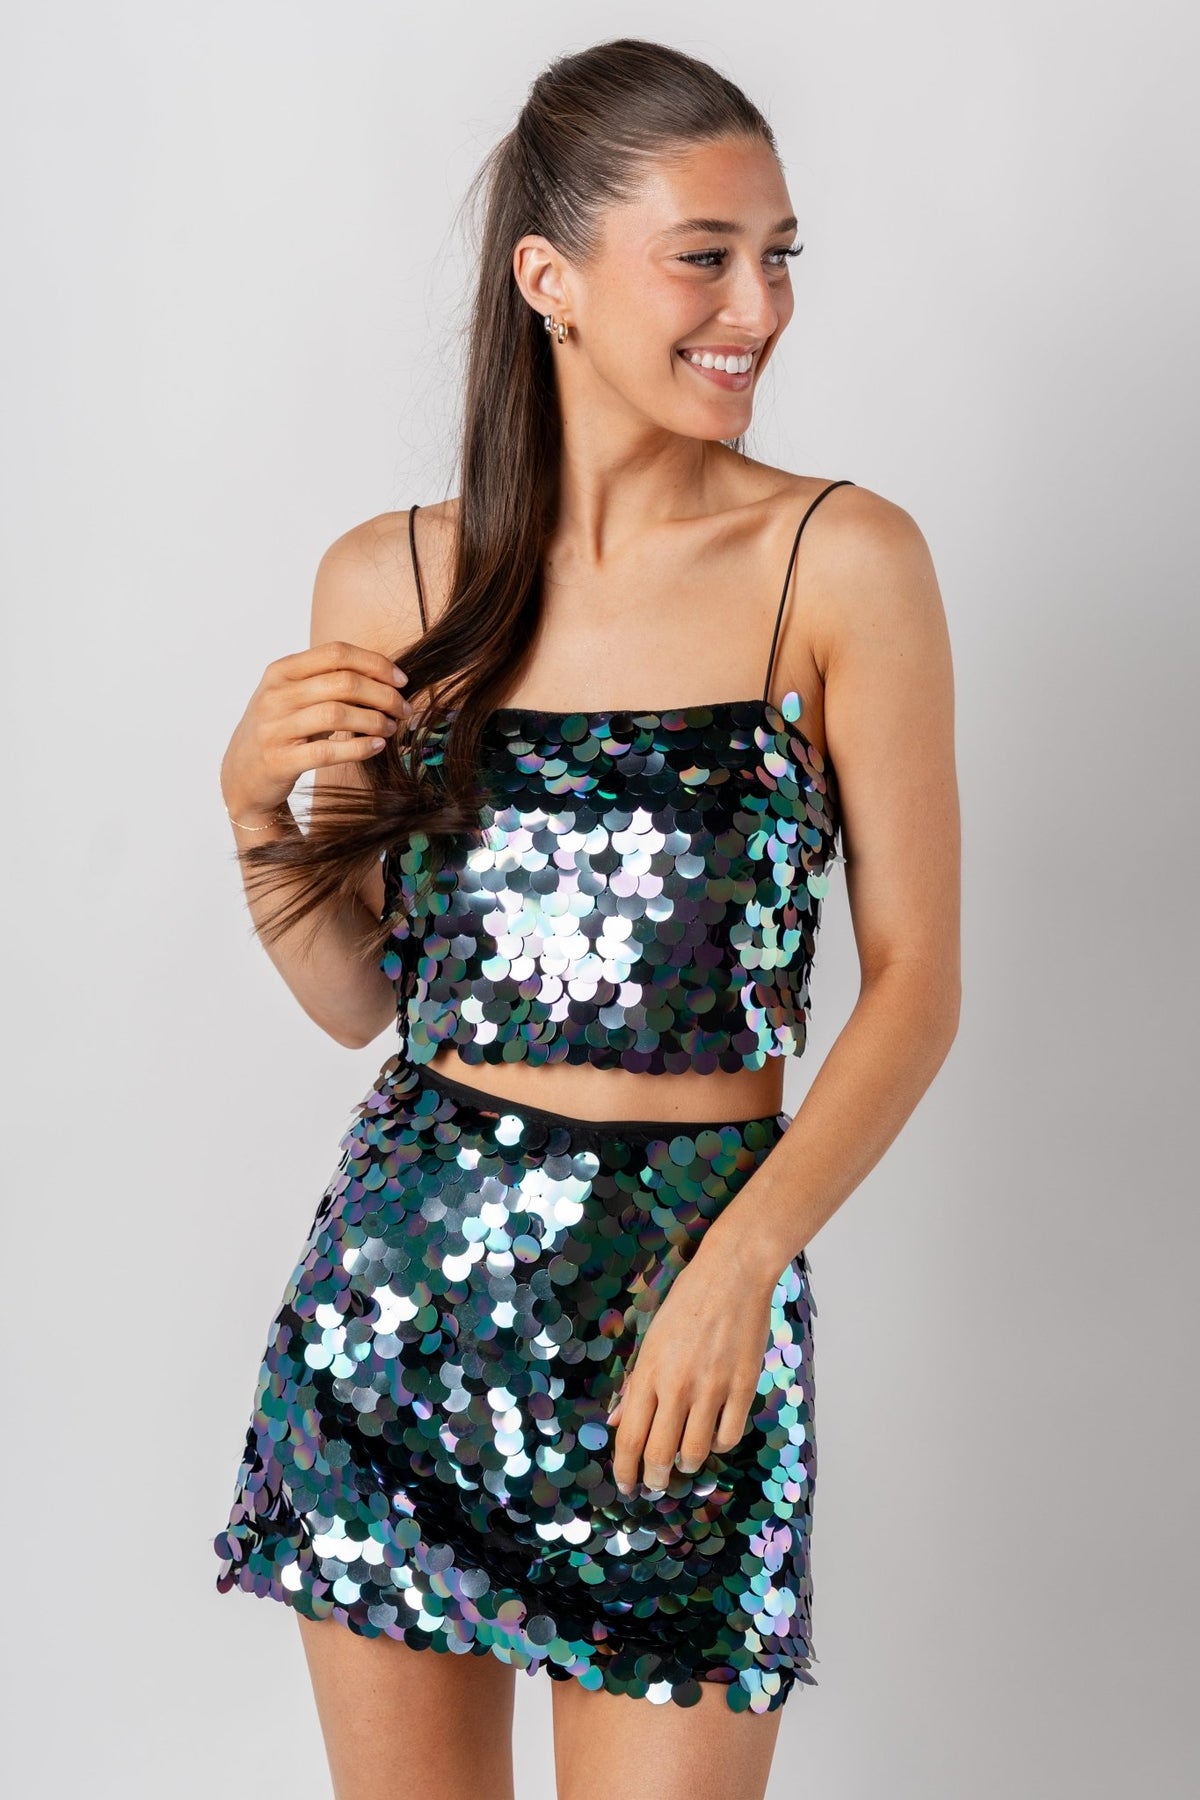 Mermaid sequin cami tank top black multi - Trendy New Year's Eve Outfits at Lush Fashion Lounge Boutique in Oklahoma City